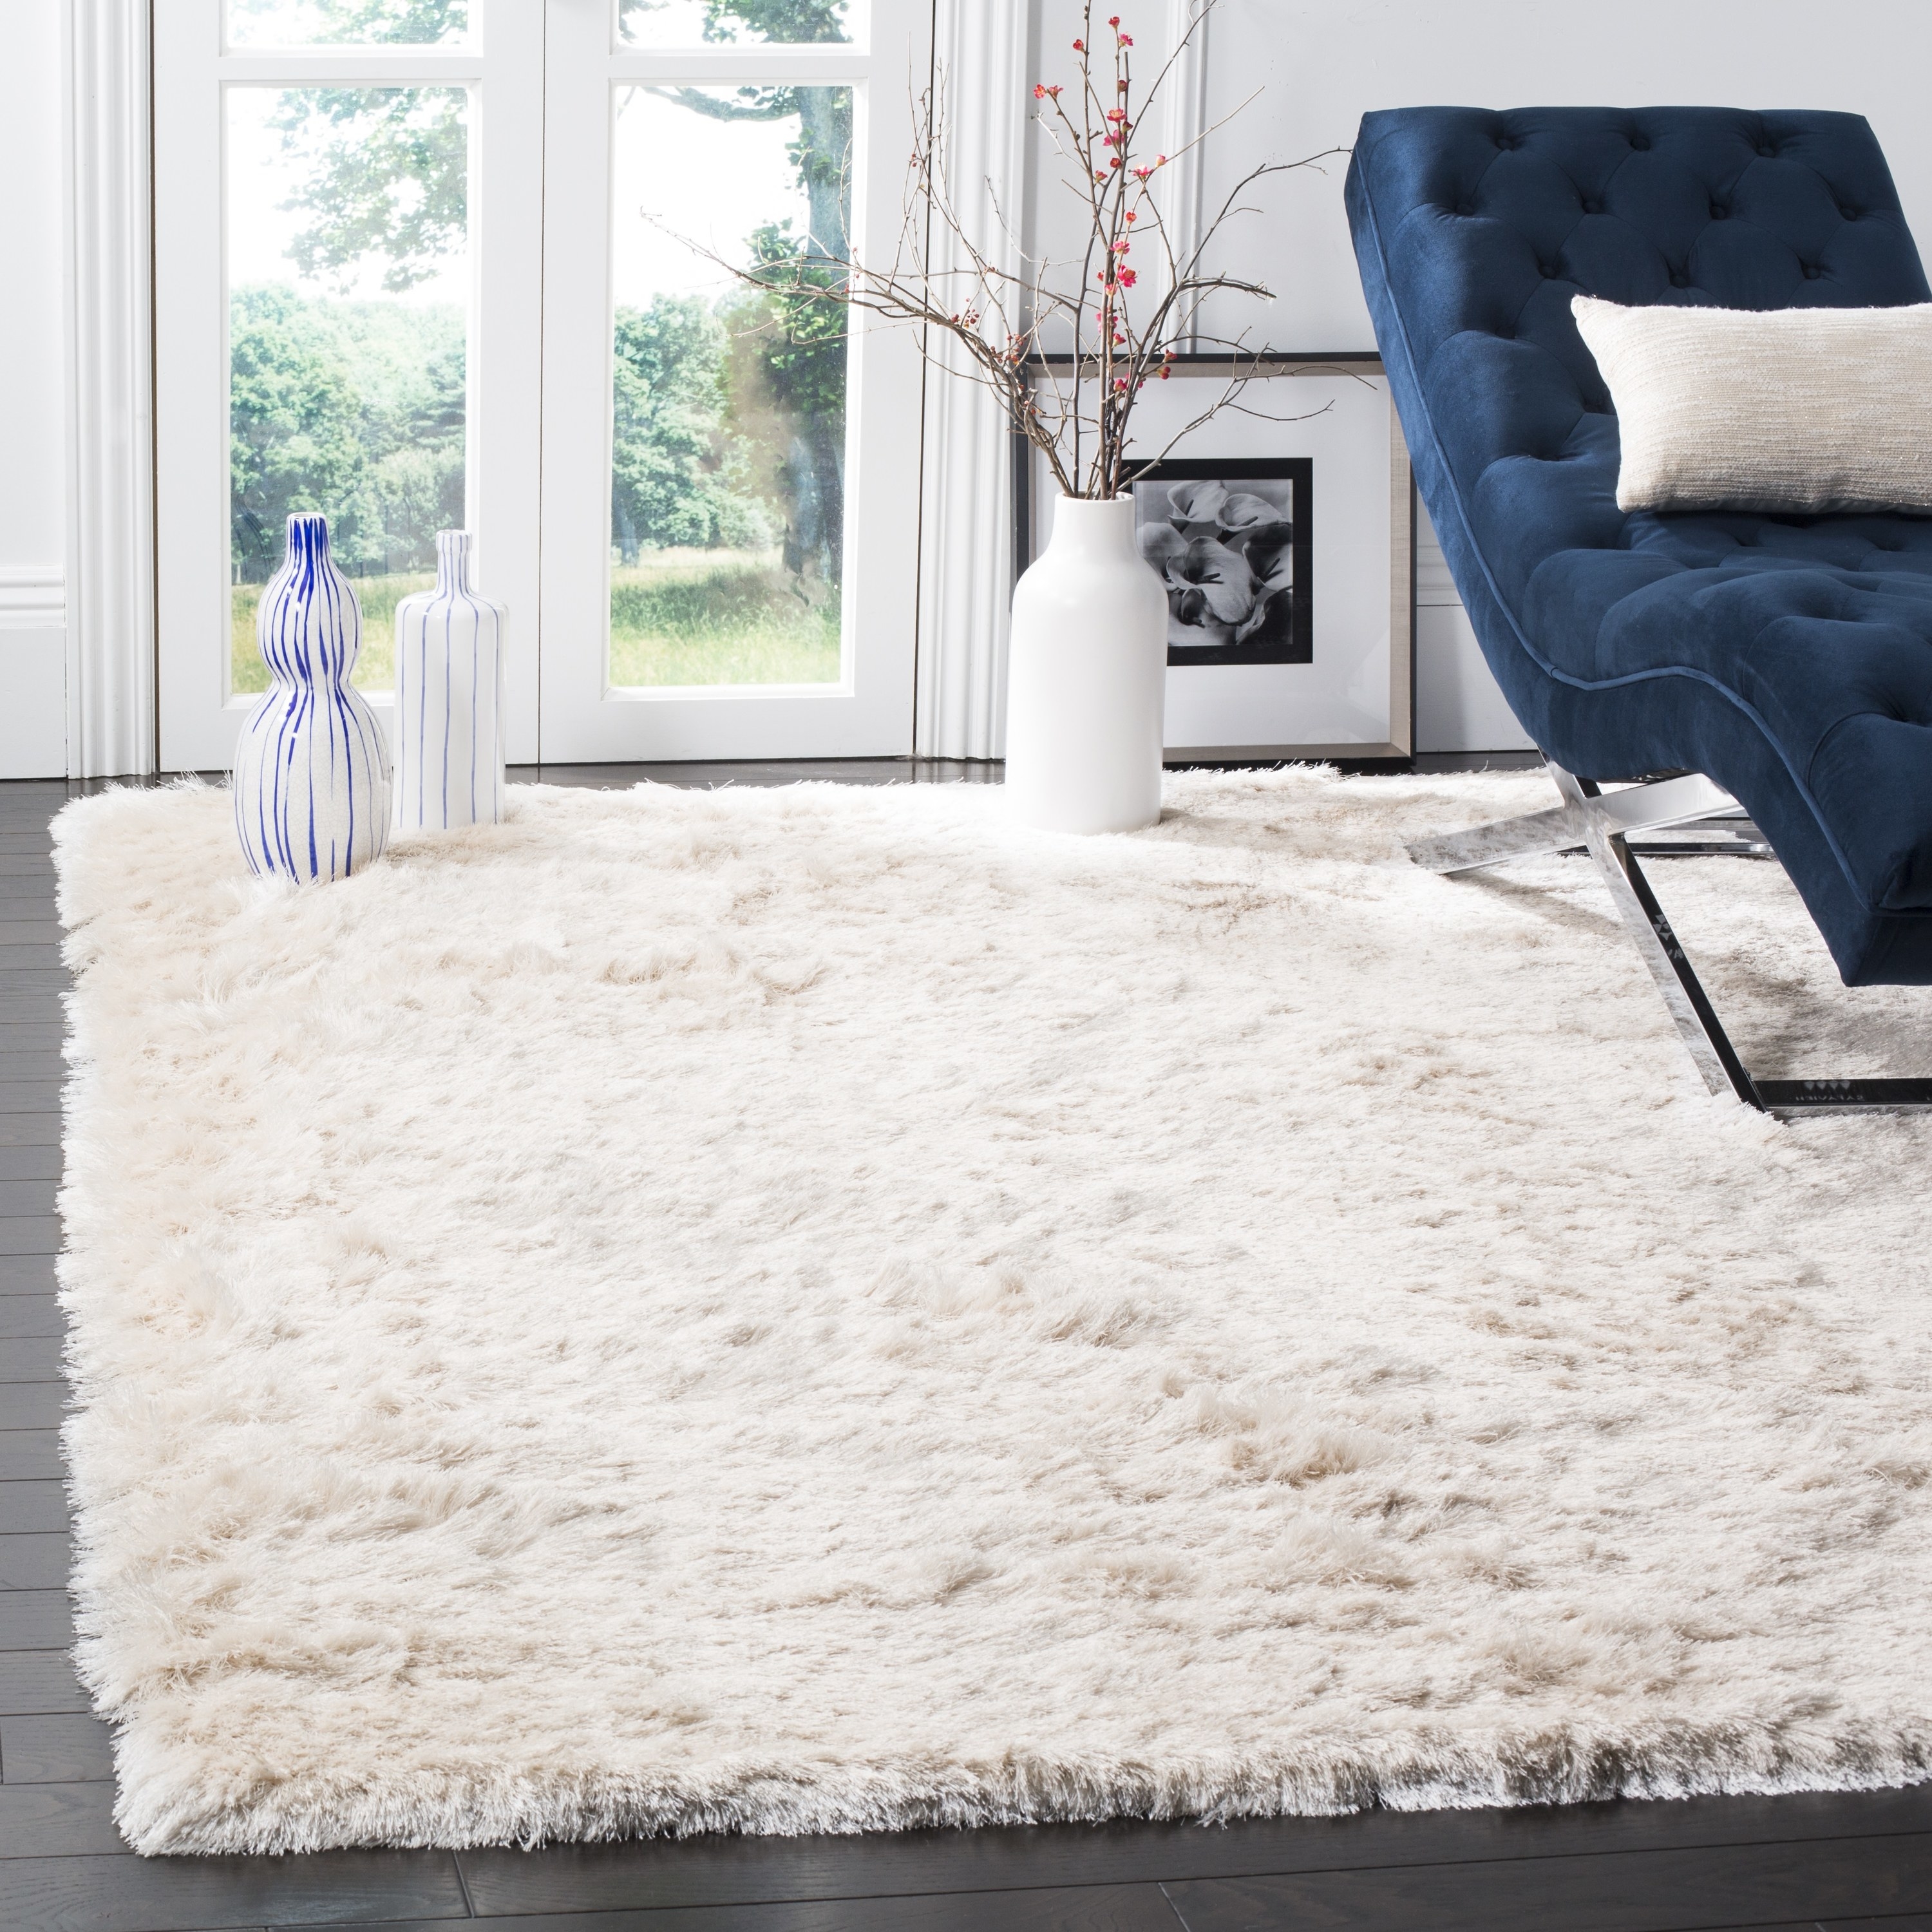 the white shag rug with a blue chair on it and other vases